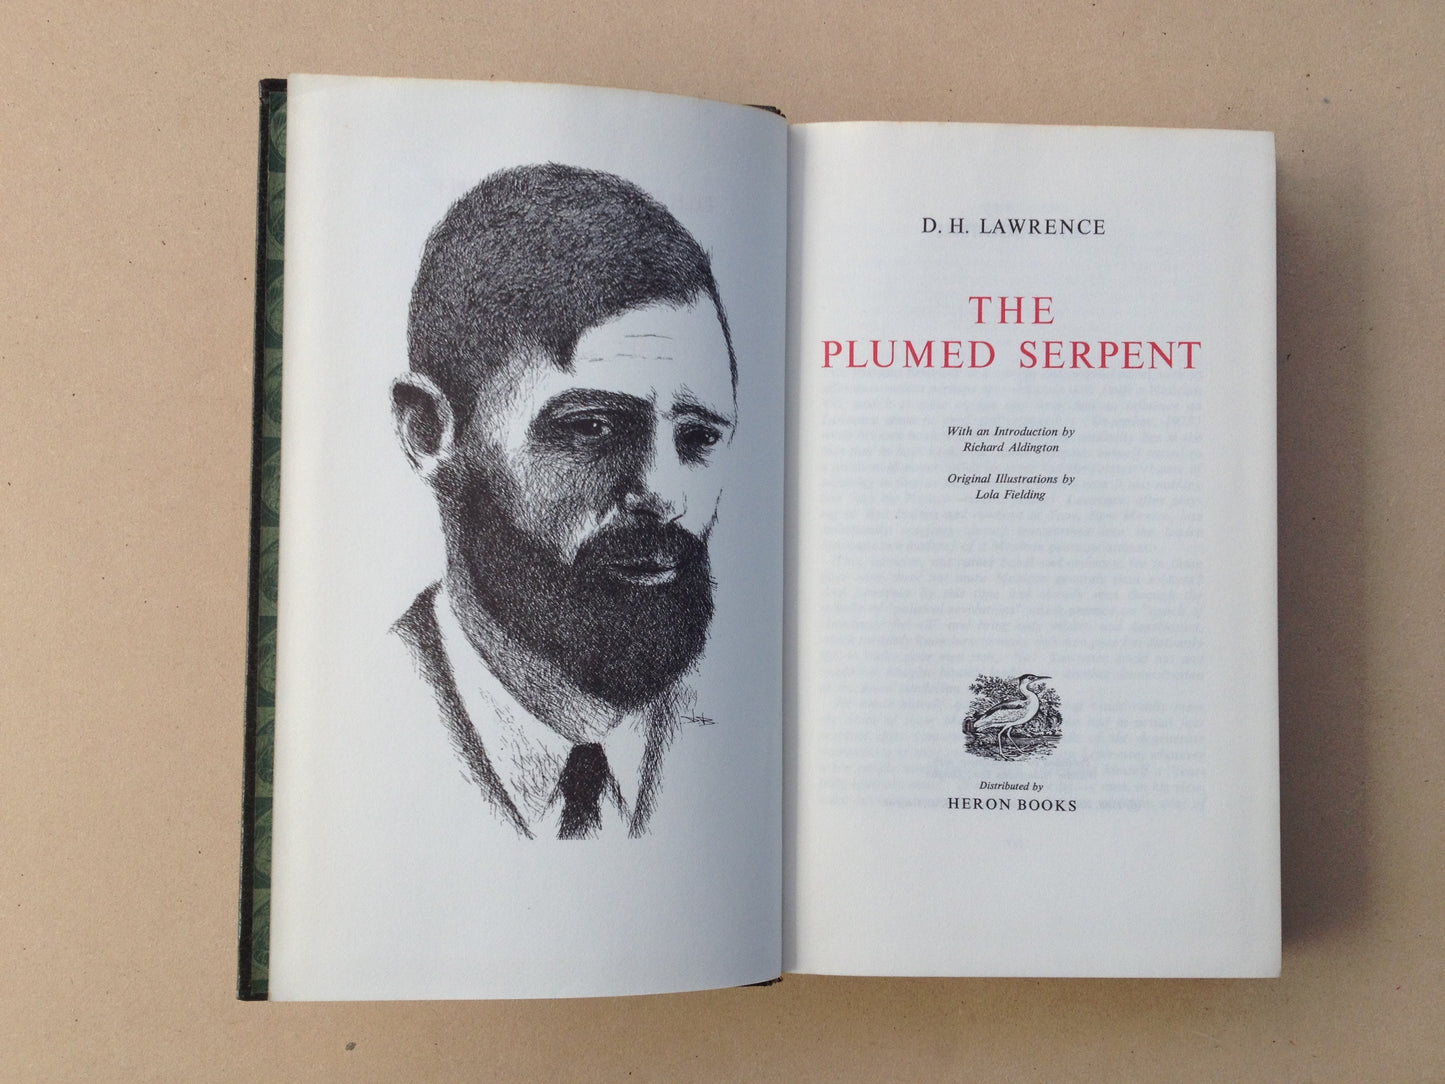 DH Lawrence Complete Works The Plumed Serpent by Heron Books London